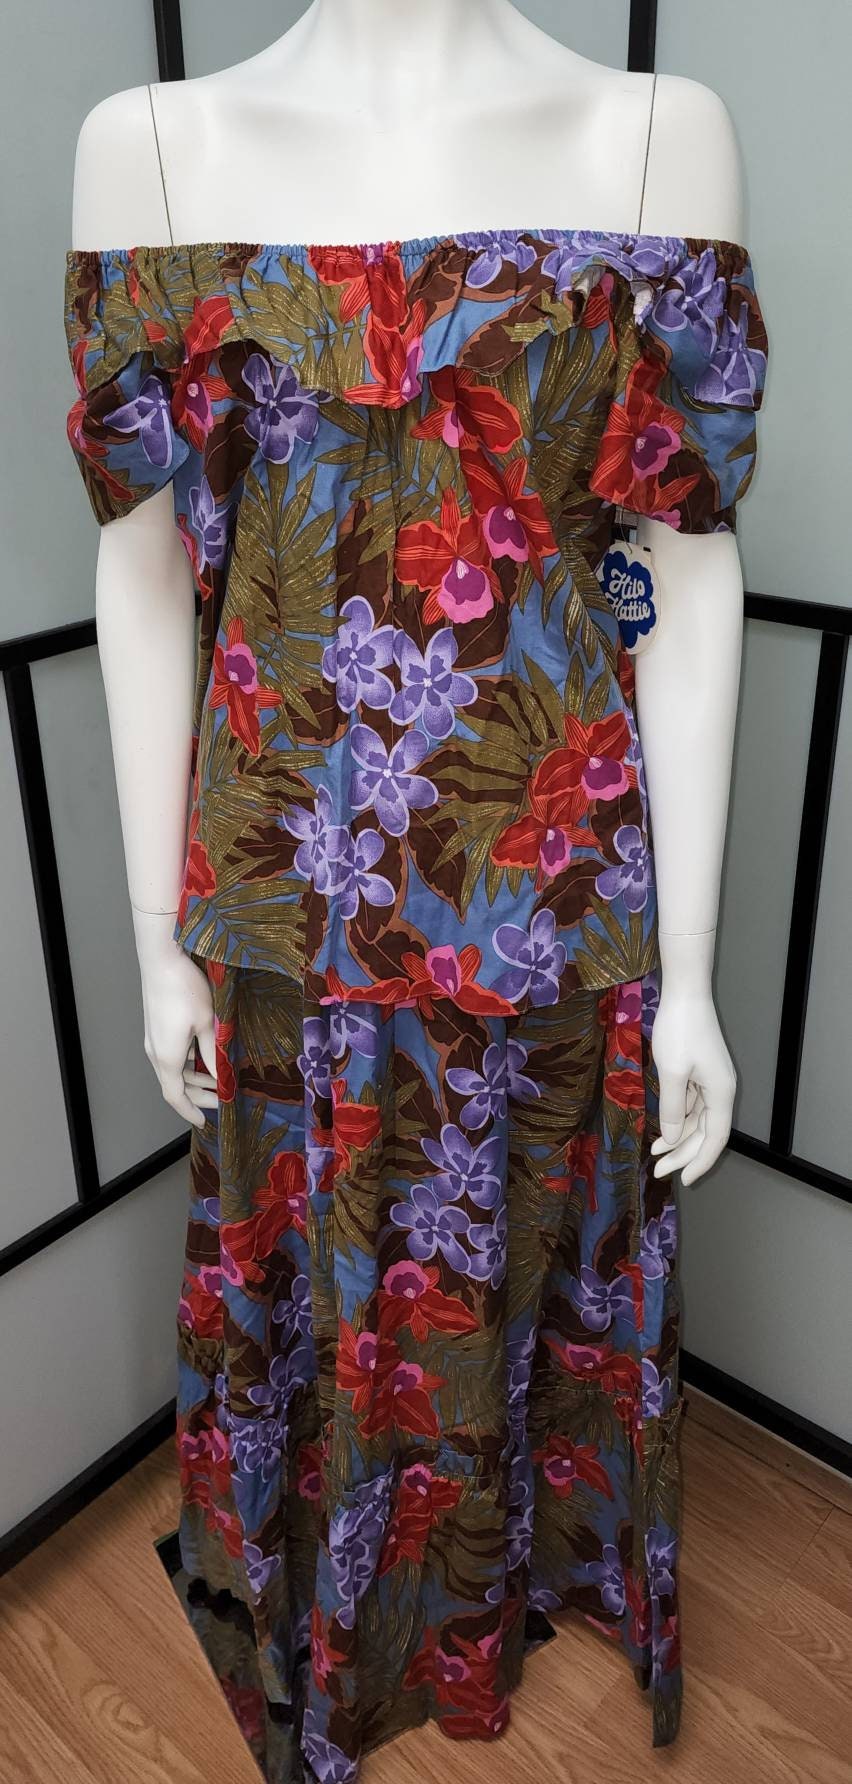 Unworn Vintage Hawaiian Top and Skirt 1980s Hilo Hattie Elastic Neck Top and Long Swingy Skirt Tropical Floral Print NWT Hippie Boho M